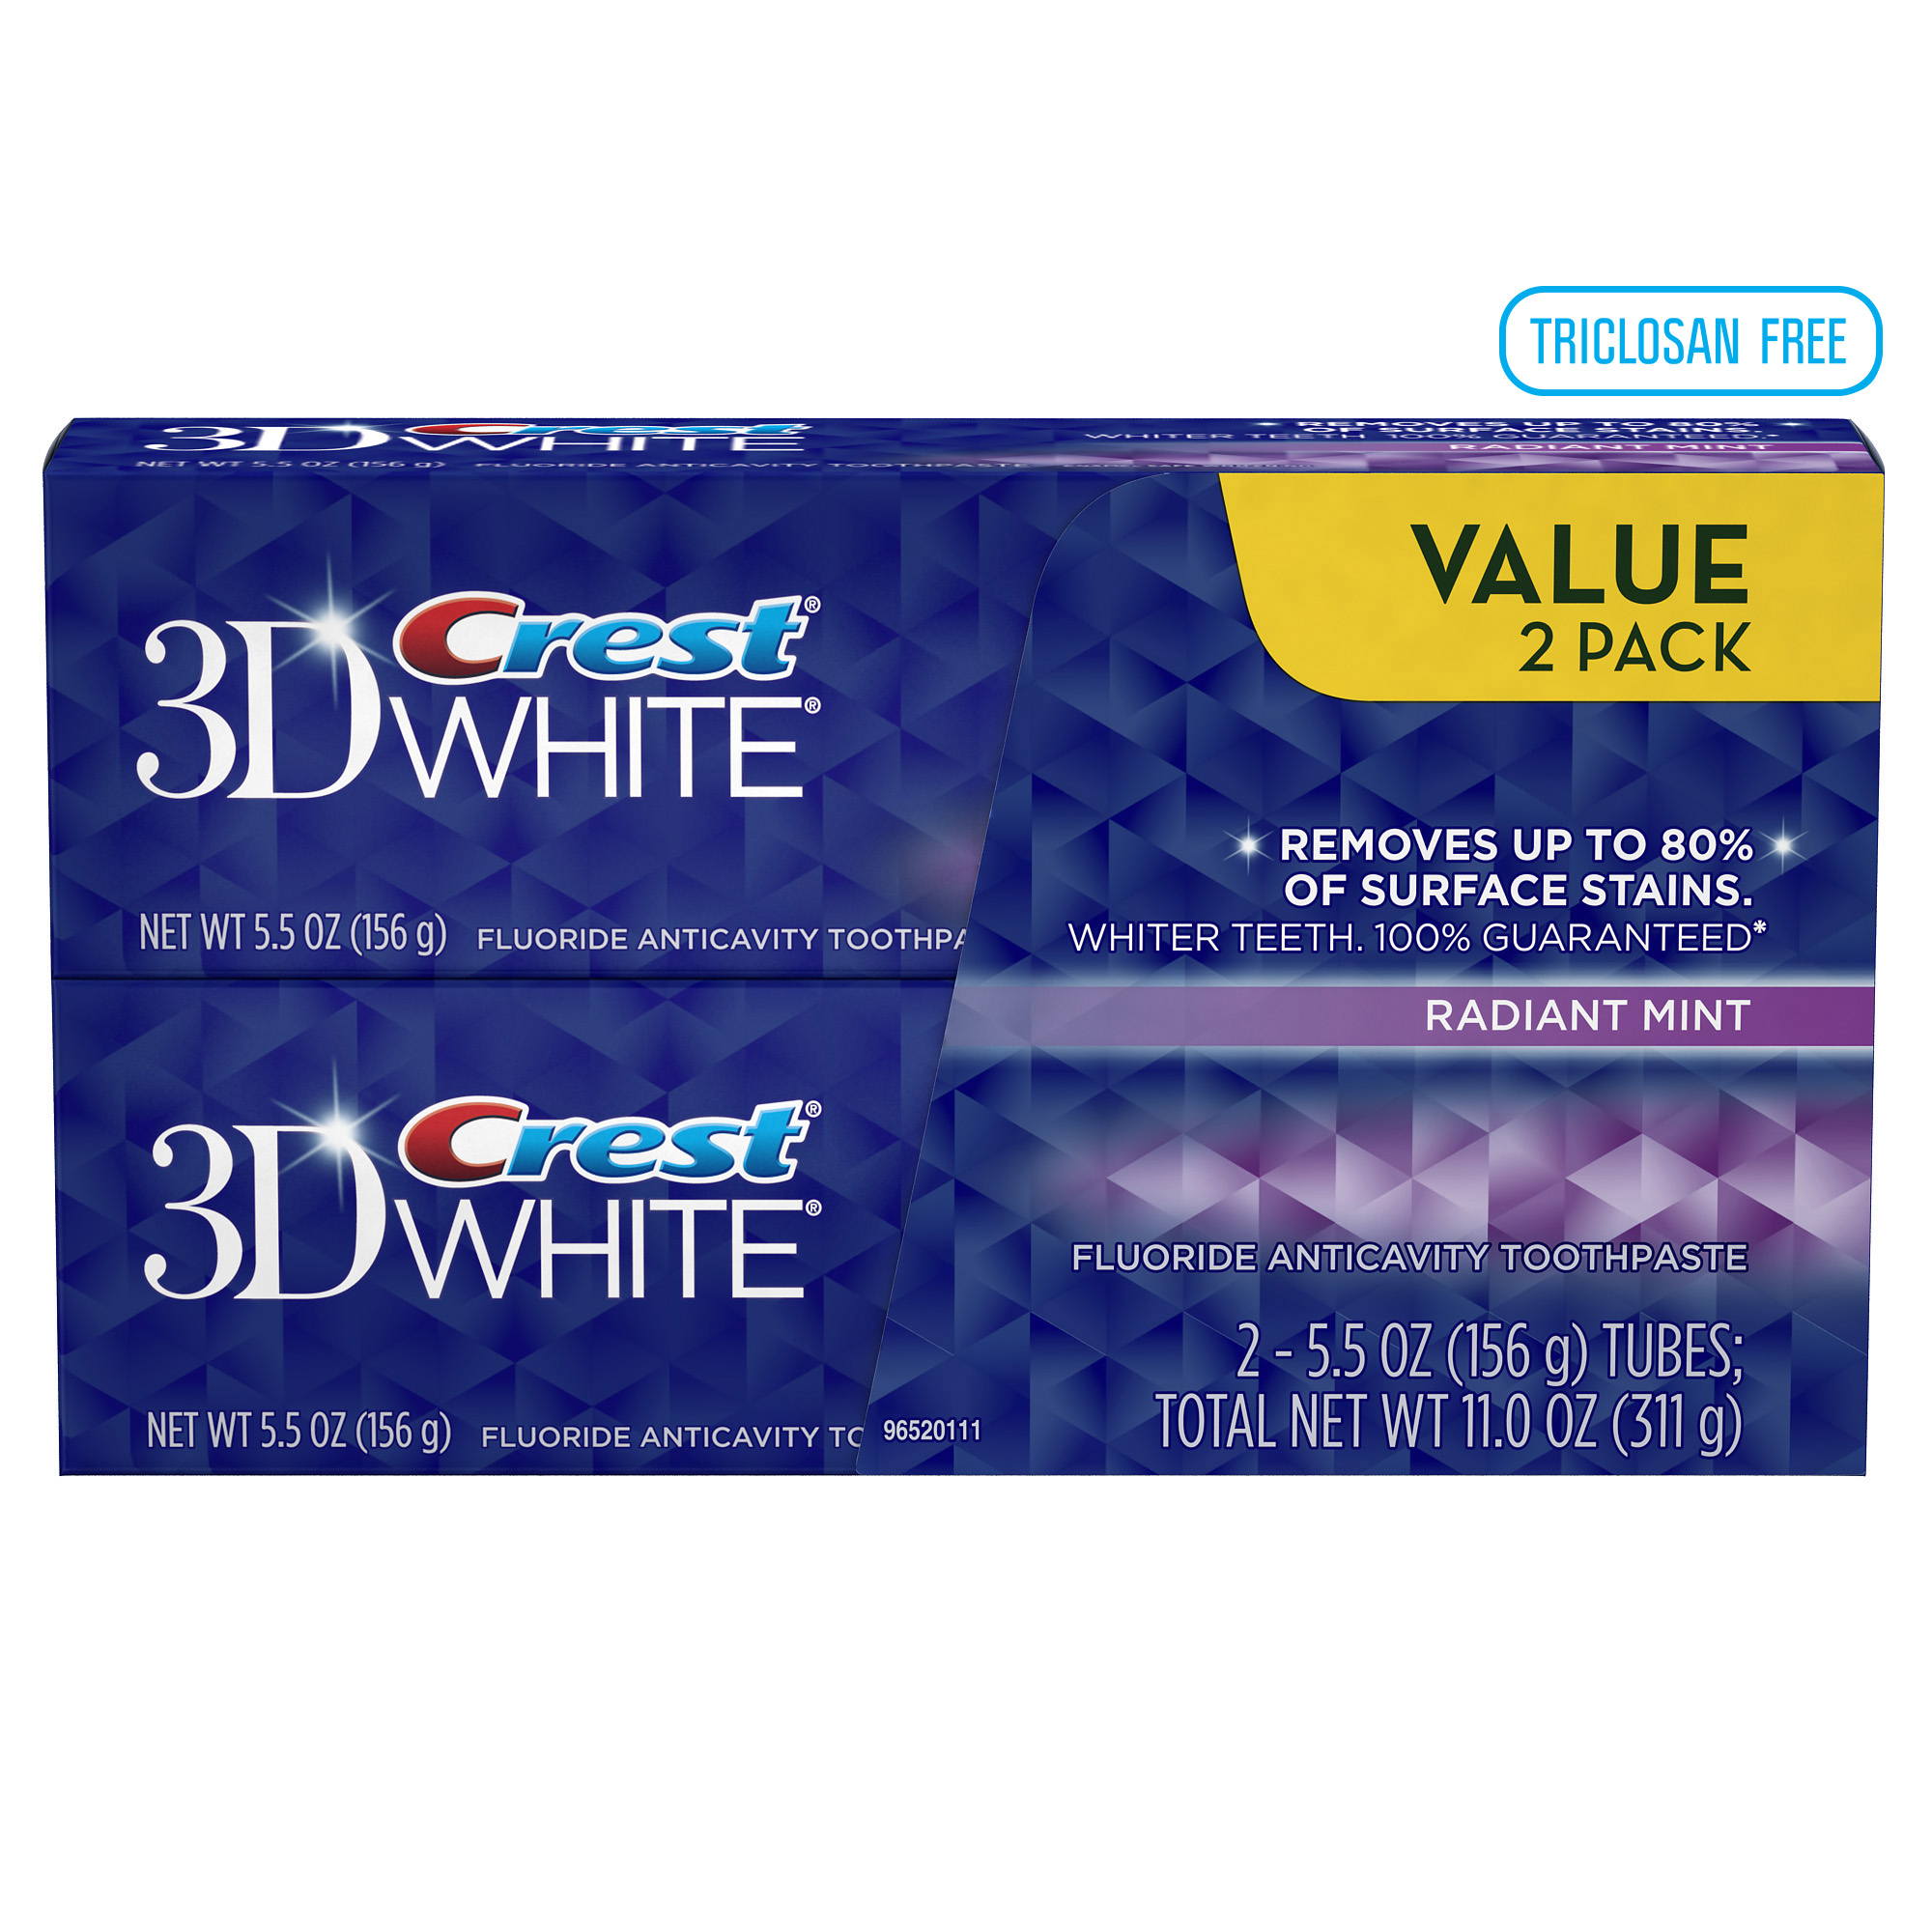 Crest 3D White Radiant Mint Flavor Whitening Toothpaste Twin Pack 11 Oz - image 4 of 11